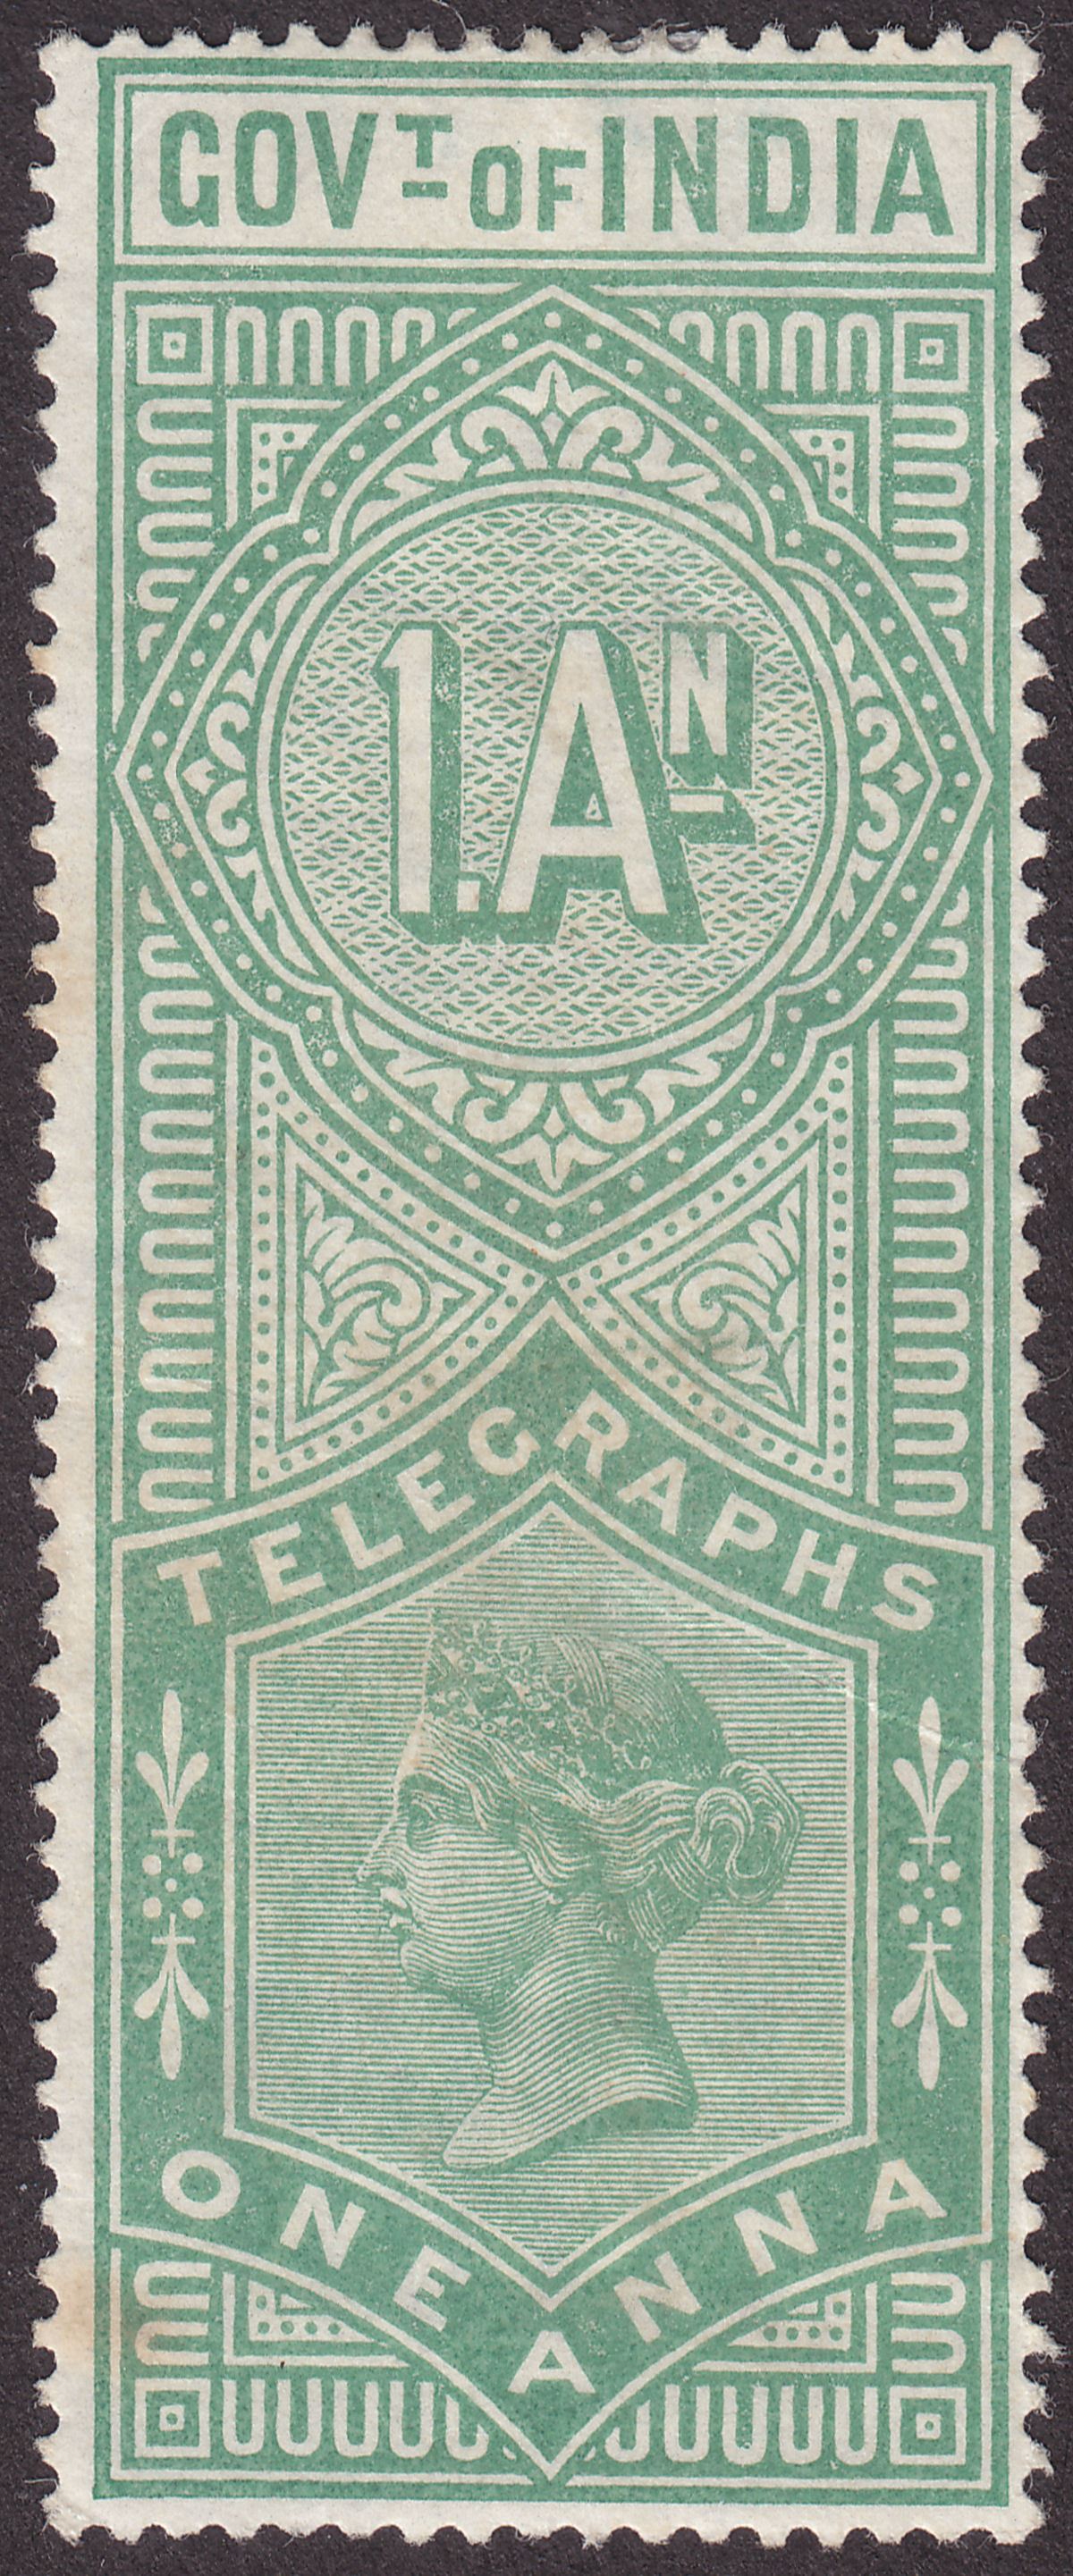 India 1890 QV Telegraph Stamp 1a Yellowish Green Mint SG T42 cat £20